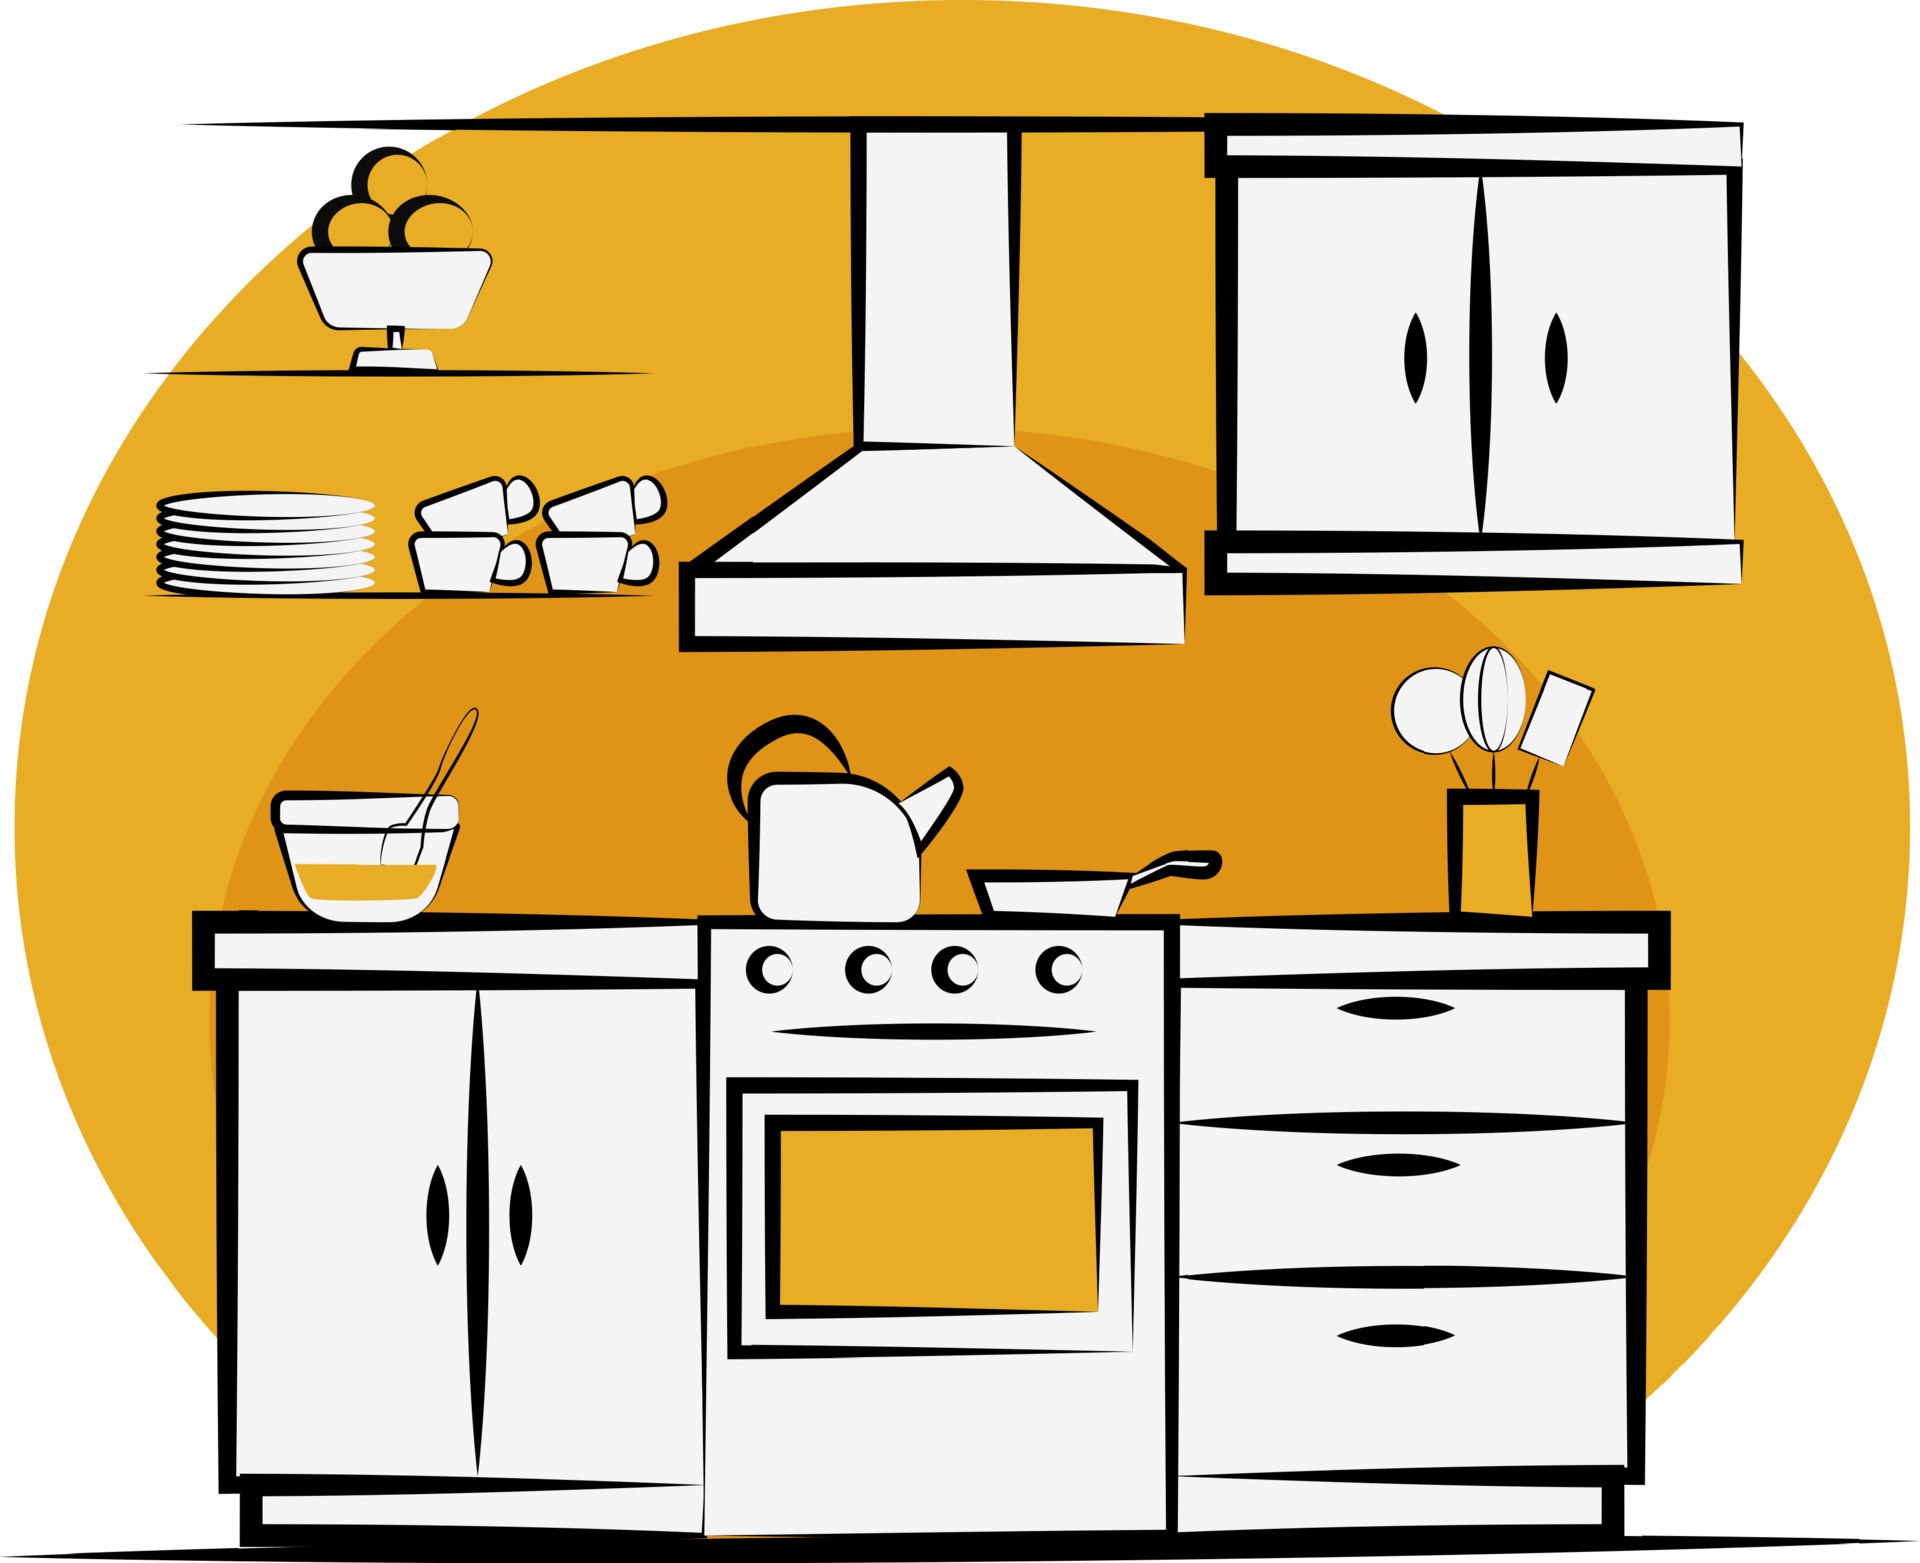 https://static.vecteezy.com/system/resources/previews/007/069/307/original/hand-drawn-illustration-of-a-kitchen-kitchen-tools-and-utensils-drawing-bright-background-vector.jpg